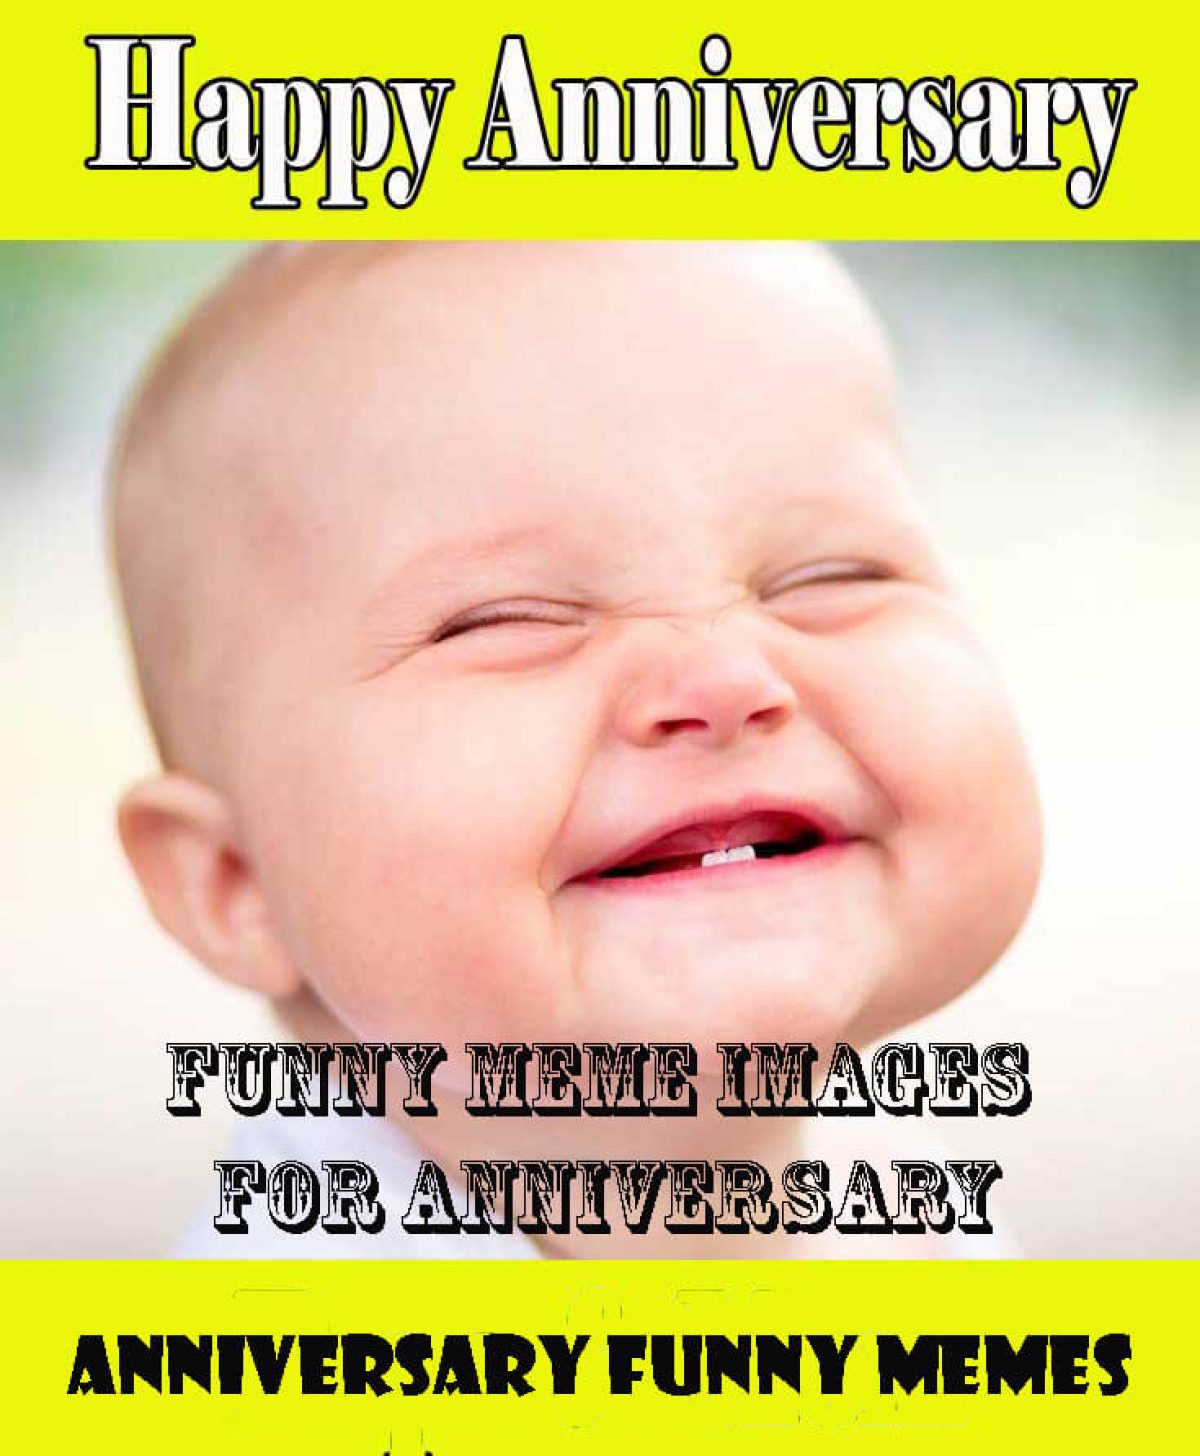 Funny Anniversary Memes For Everyone - Most Funny annversary Memes